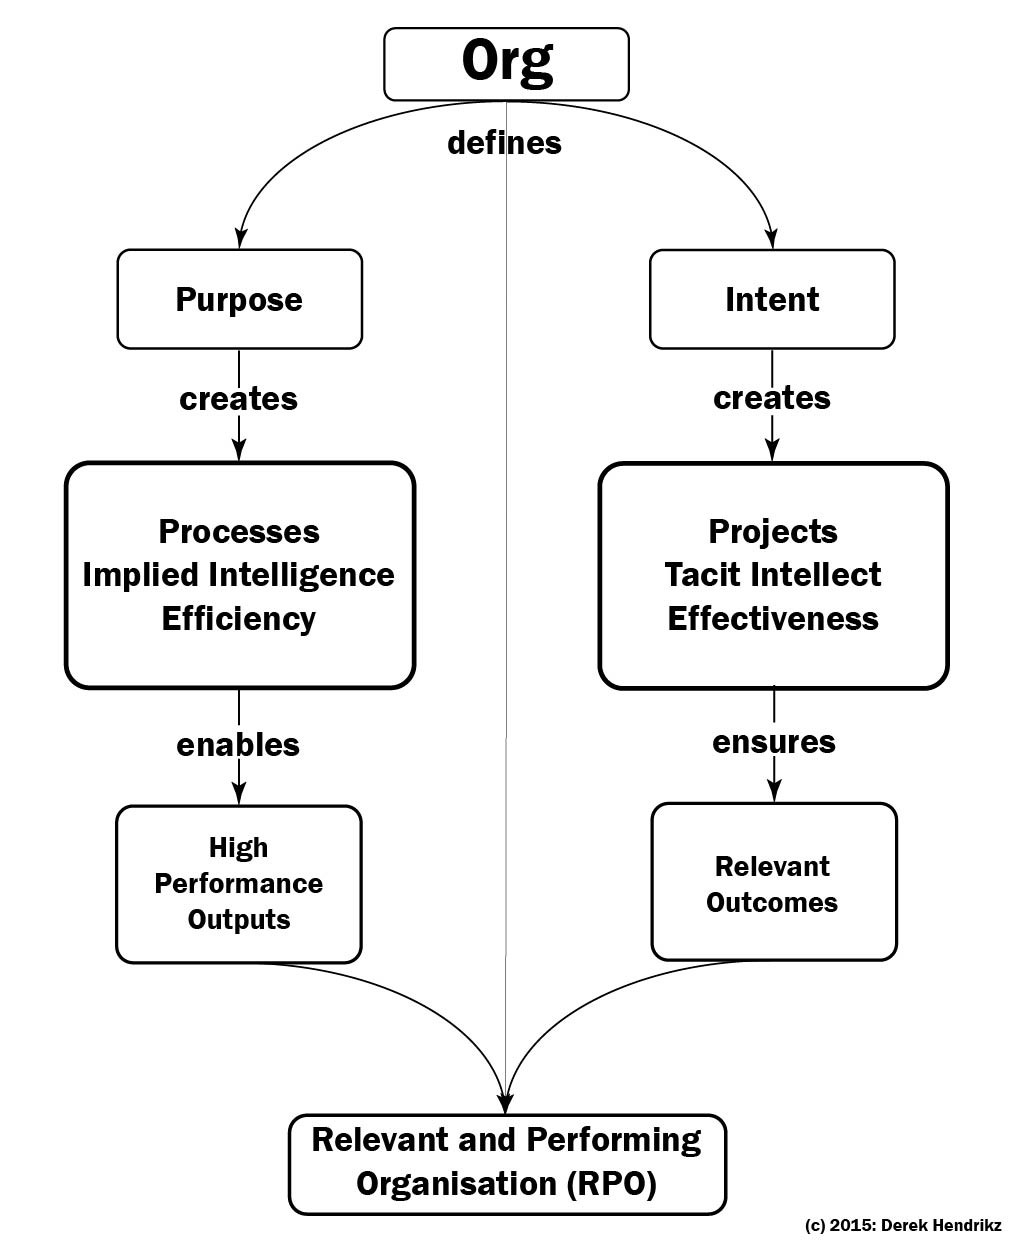 Using purpose and intent to create a Relevant and Performing Organisation (RPO)